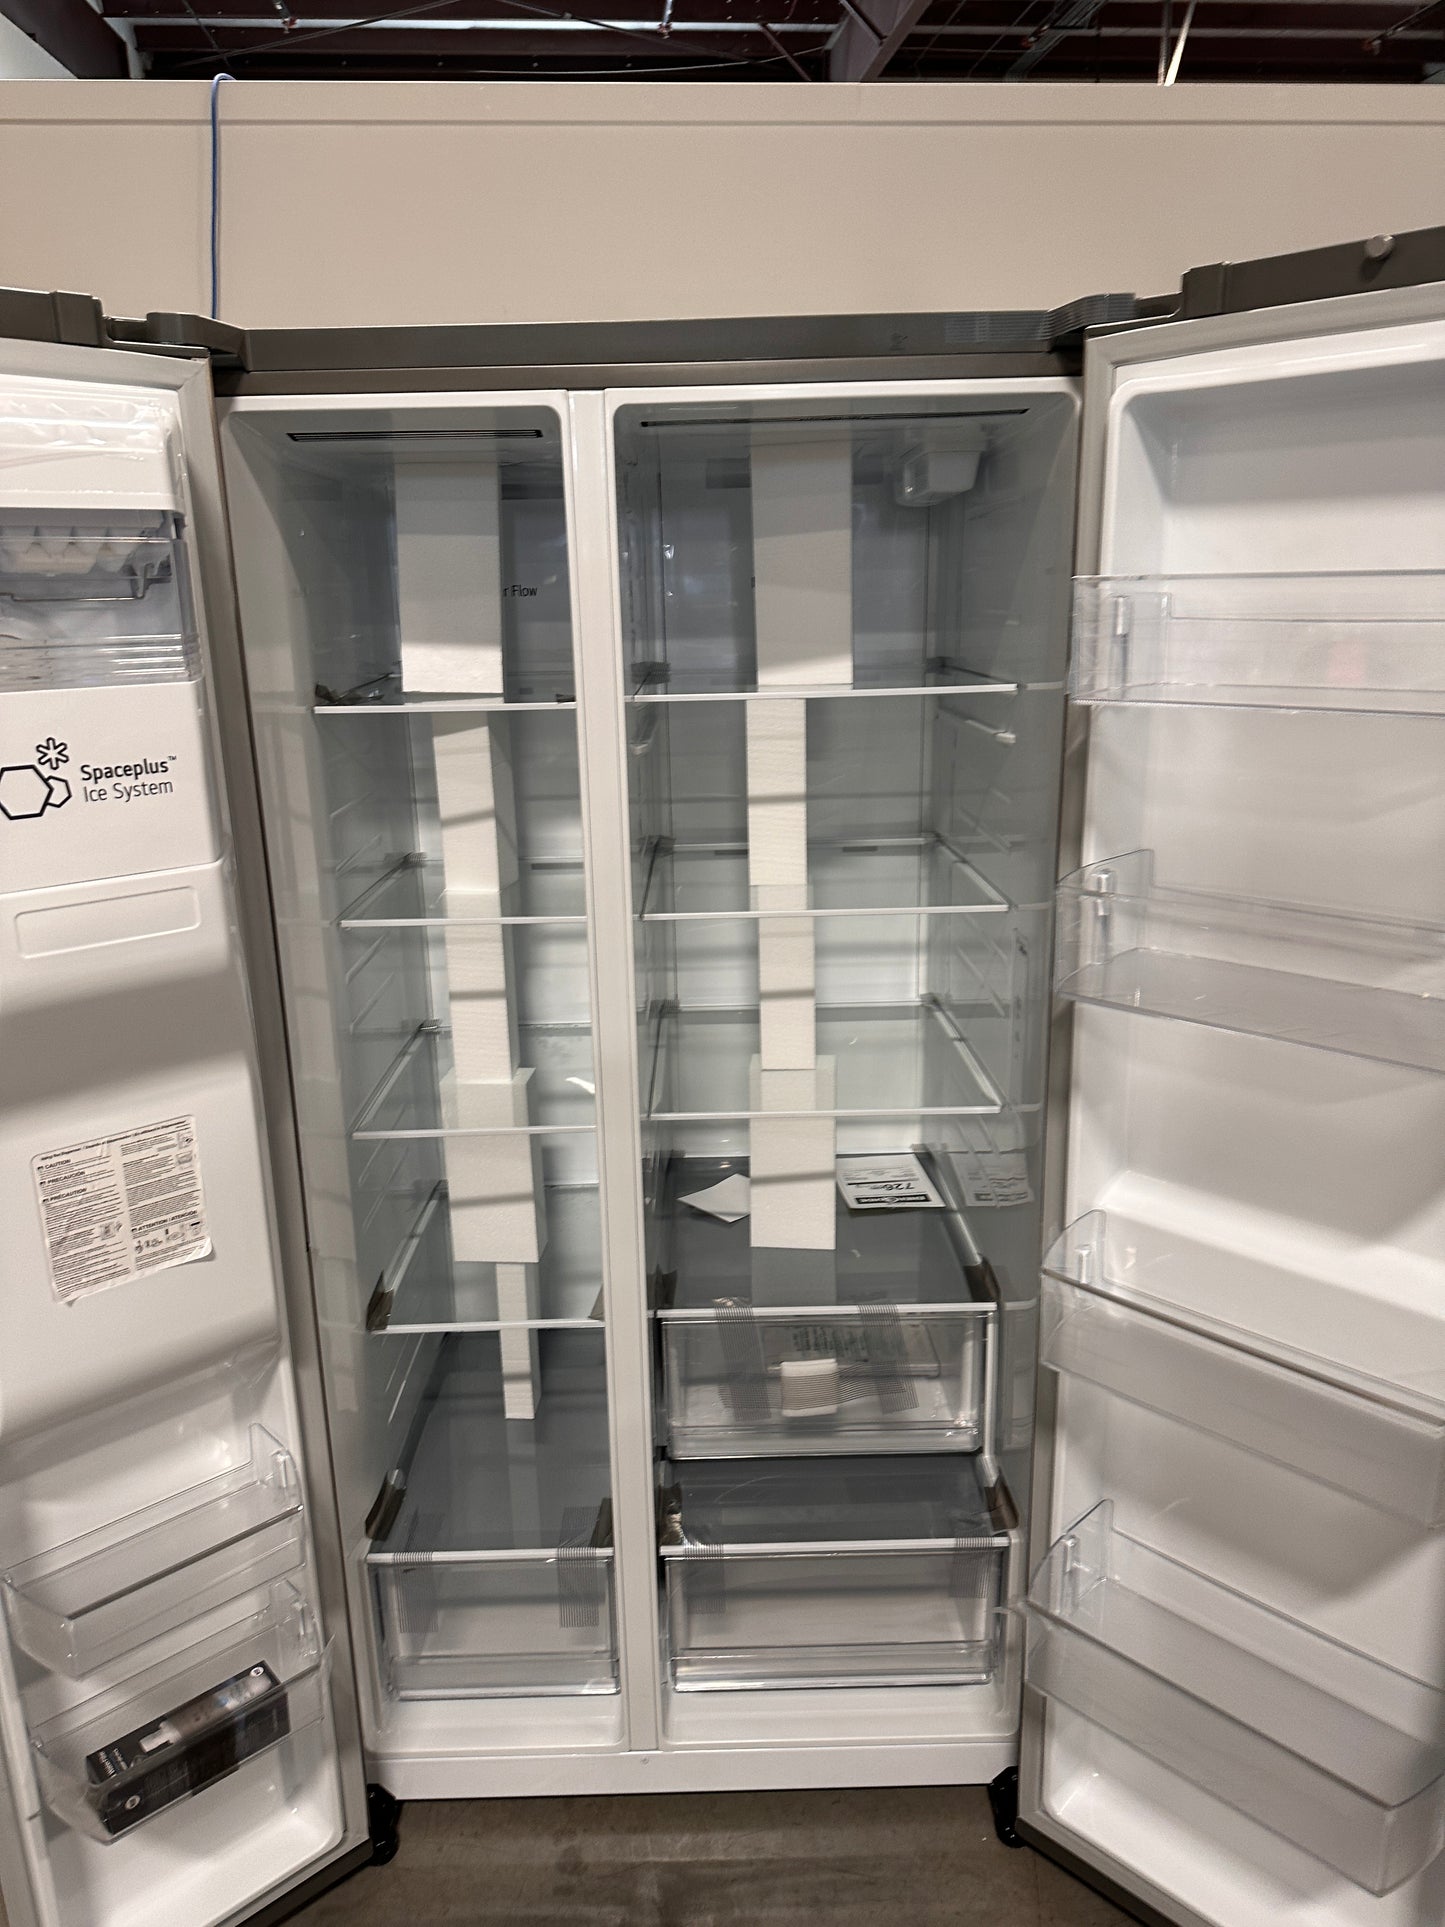 GORGEOUS NEW SIDE BY SIDE REFRIGERATOR - REF12544